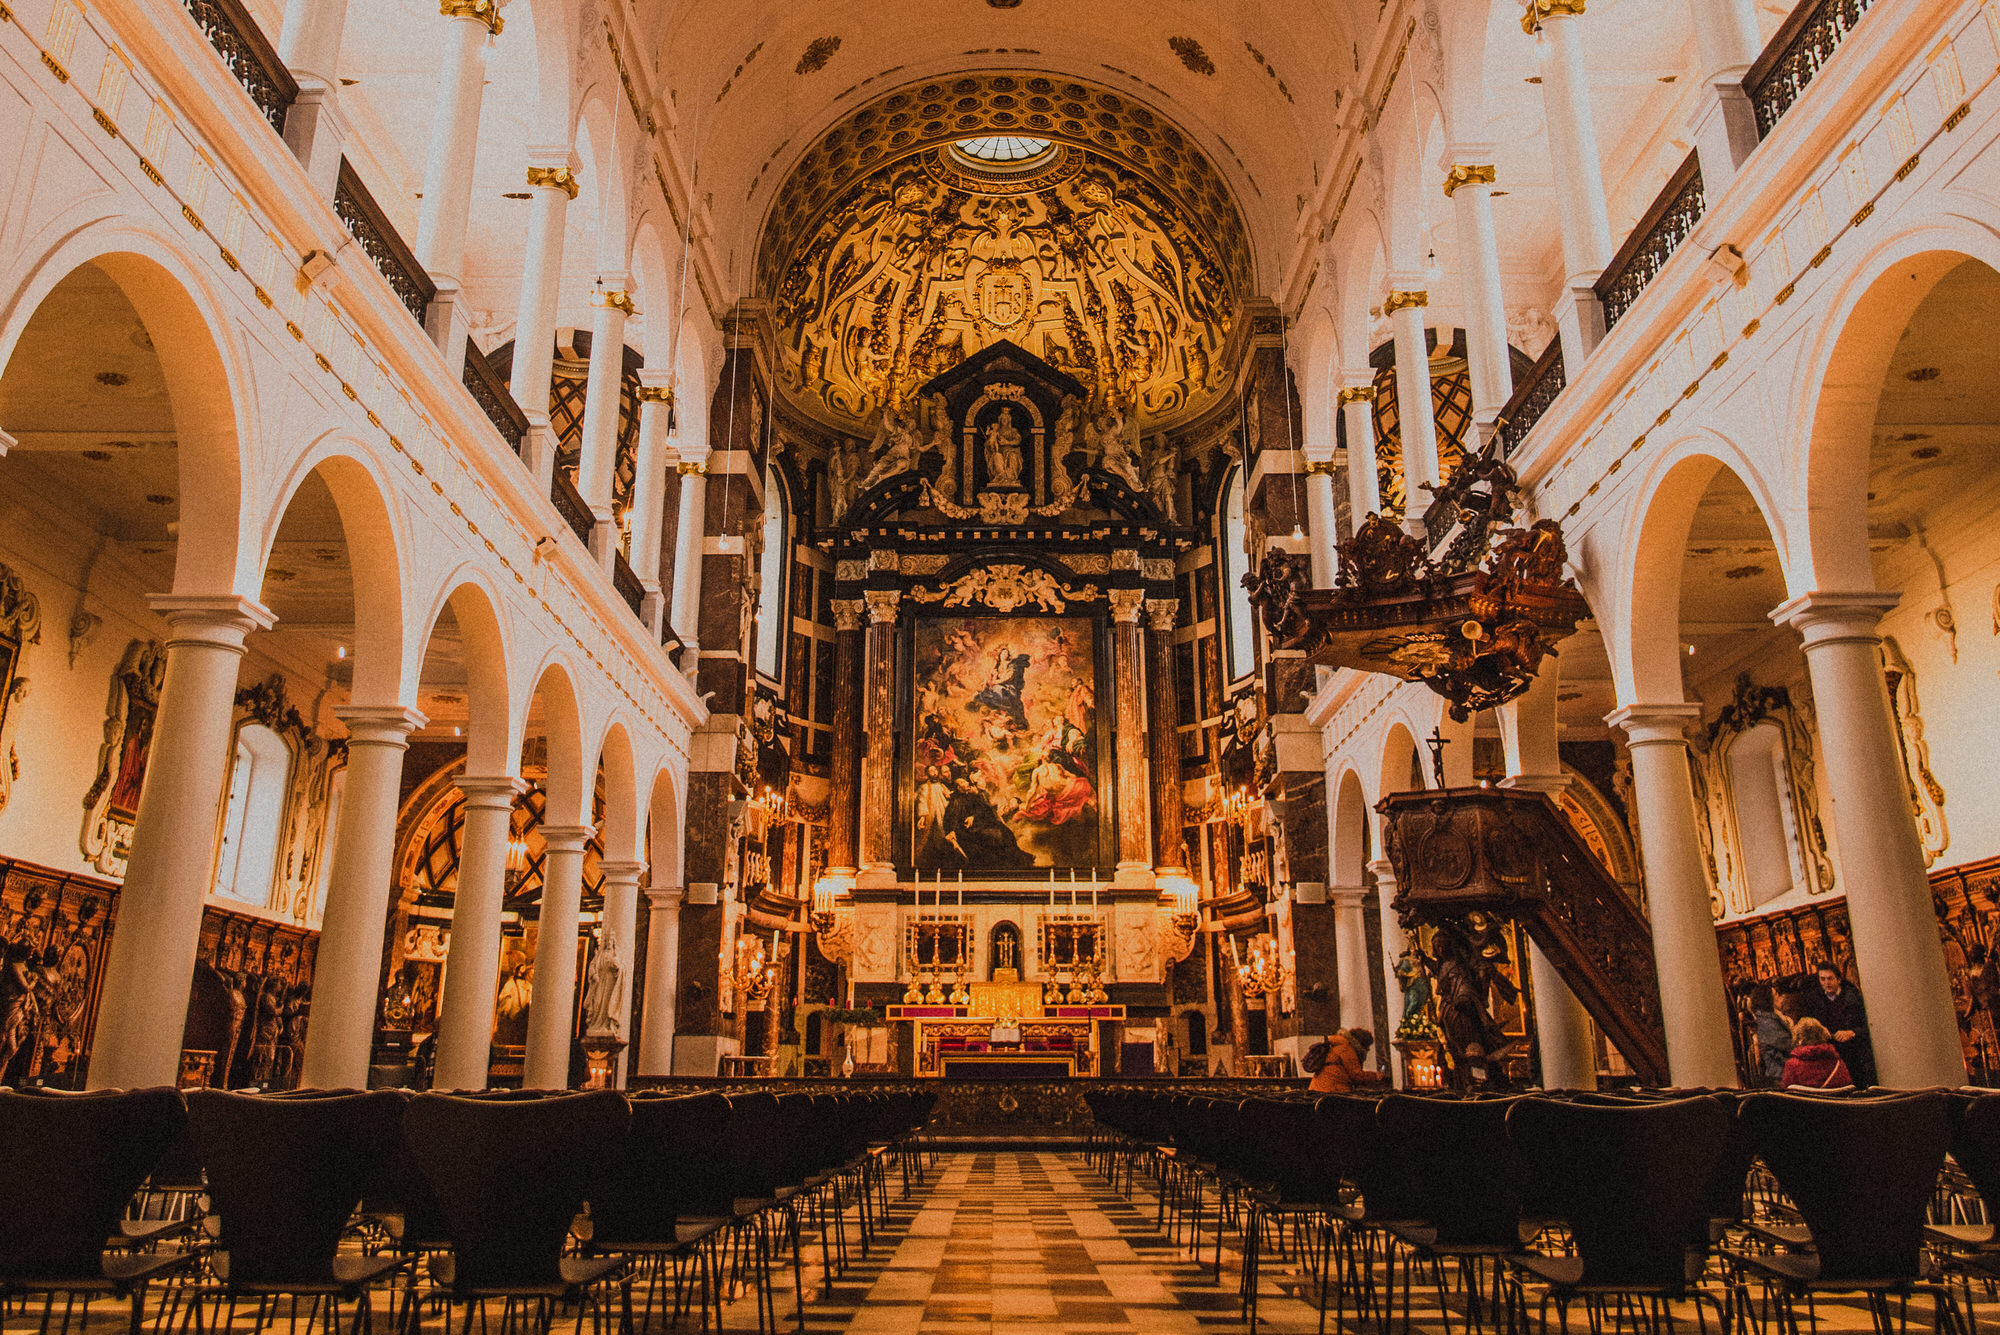 These 5 monumental churches will take your visit to Antwerp to higher spheres